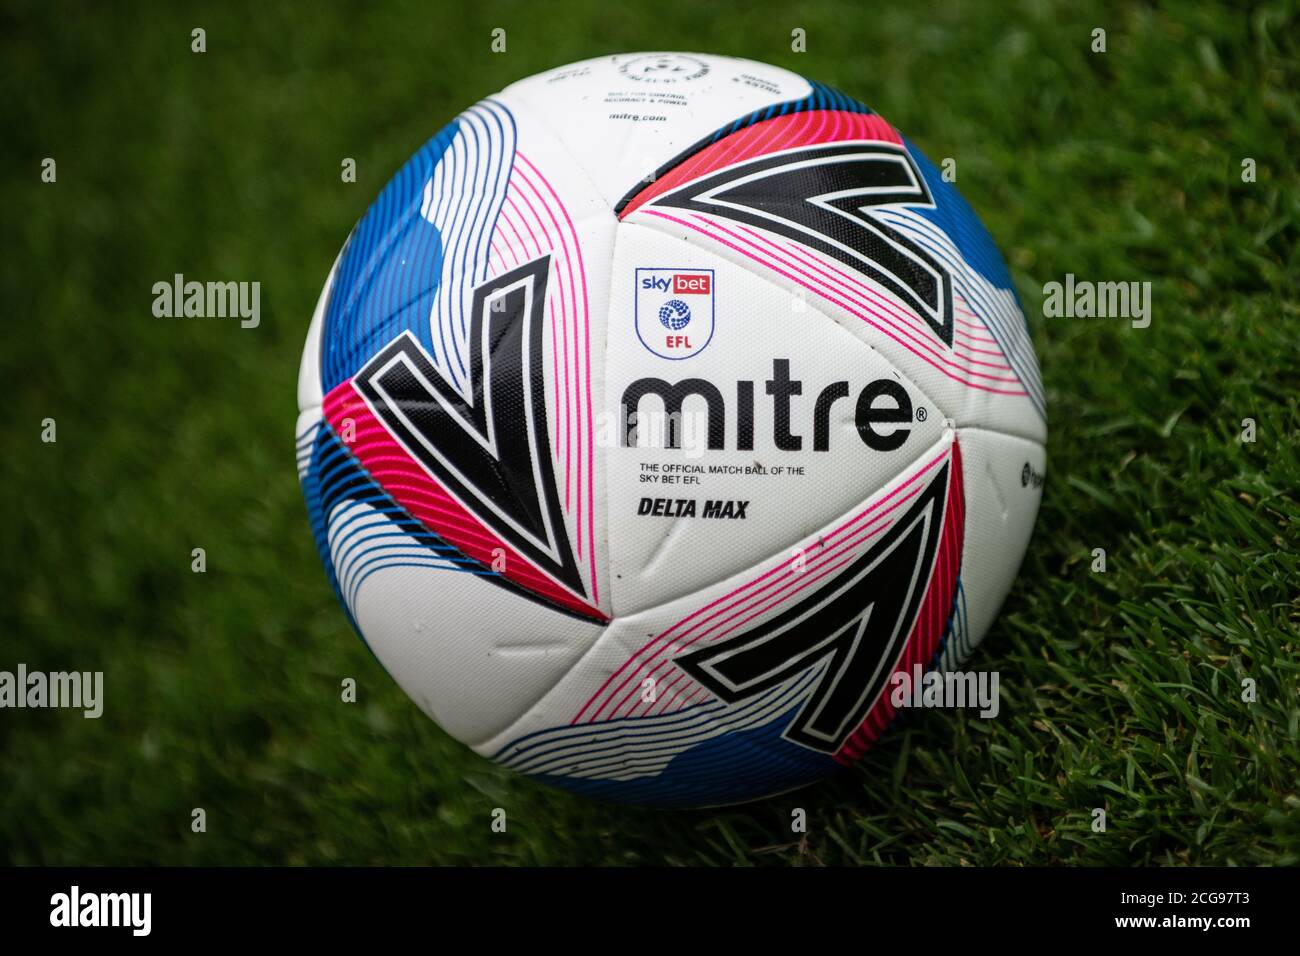 Mitre Delta Max. Official Match Ball of the EFL 2019/20. Stock Photo